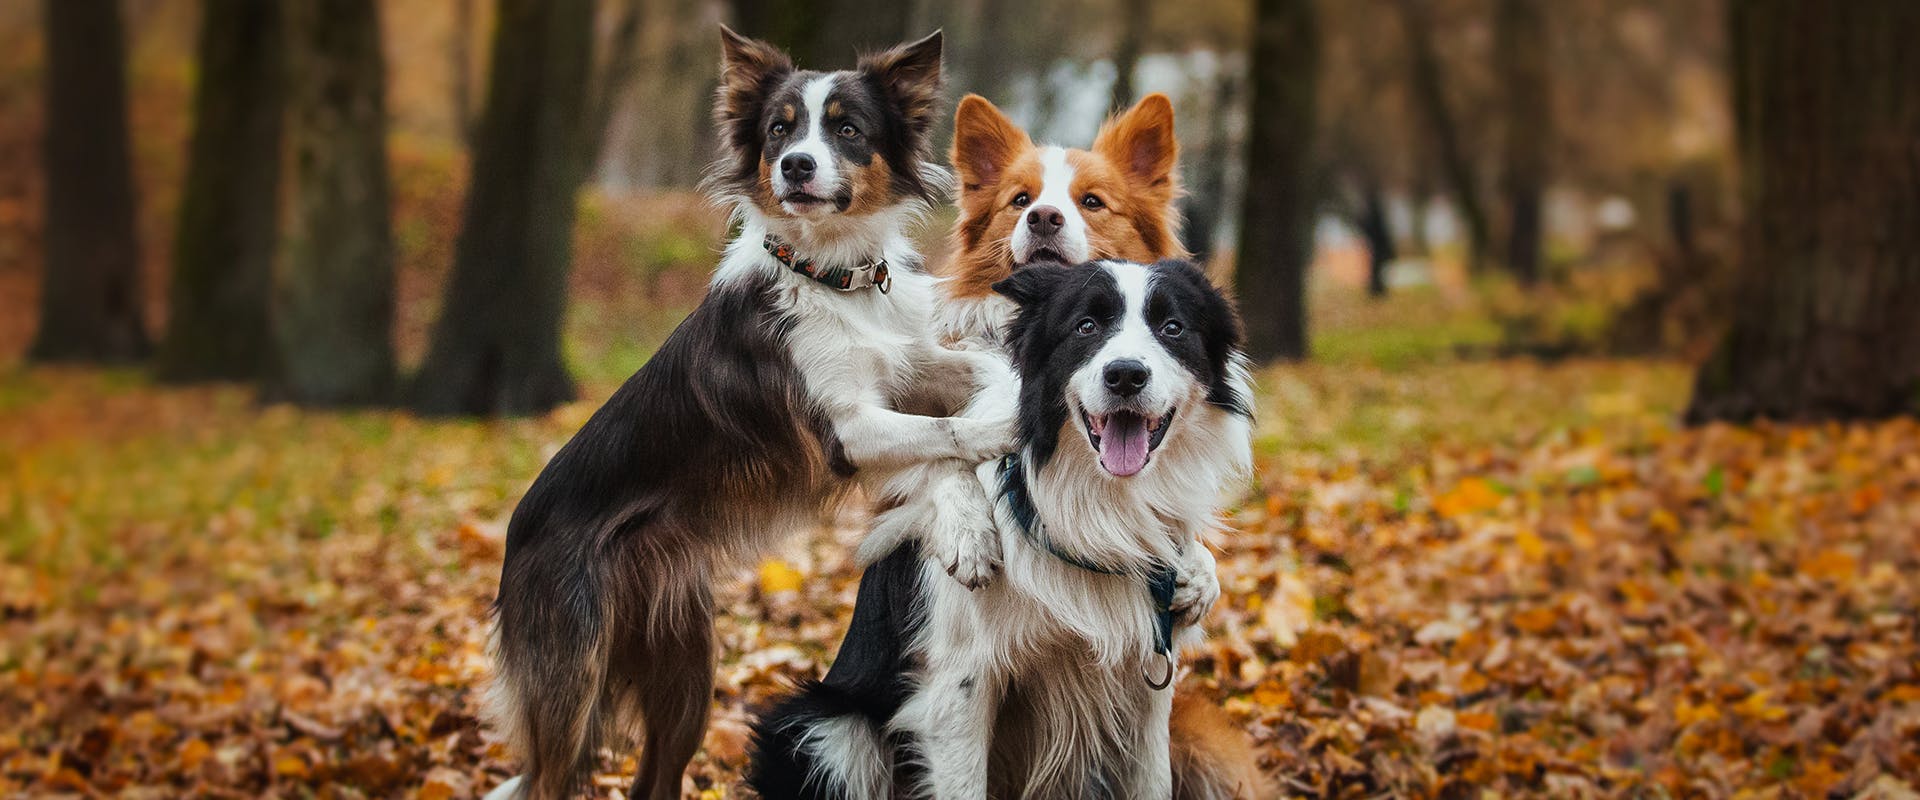 Three Collie dogs jumping on one another in the middle of an autumny forest